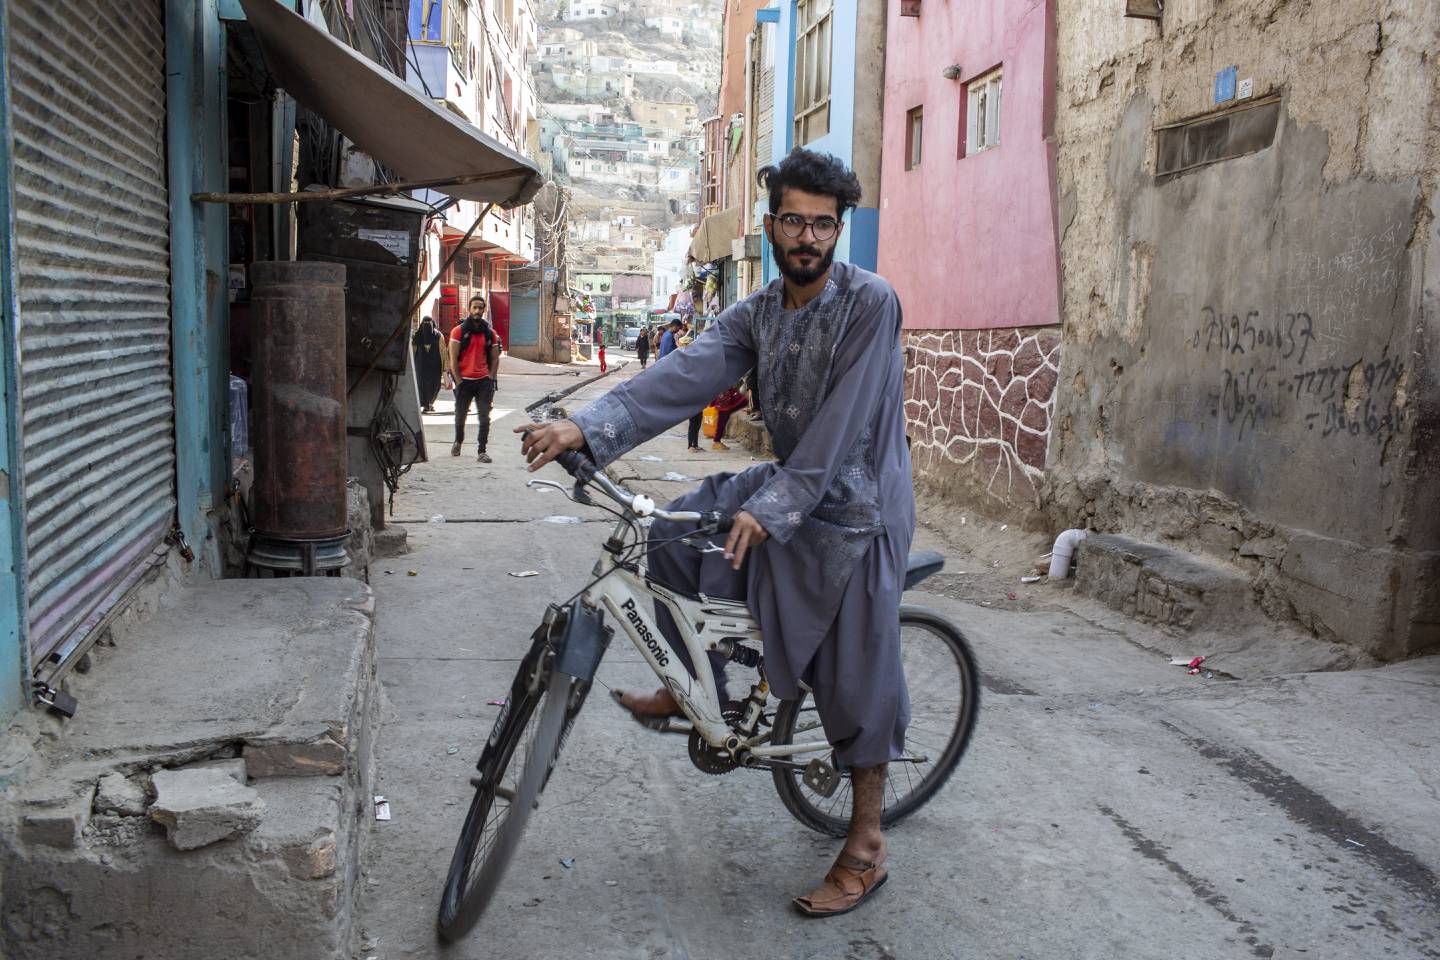 Afghan musicians have been living in old Kabul for more than a century. Photo: Asmaa Waguih